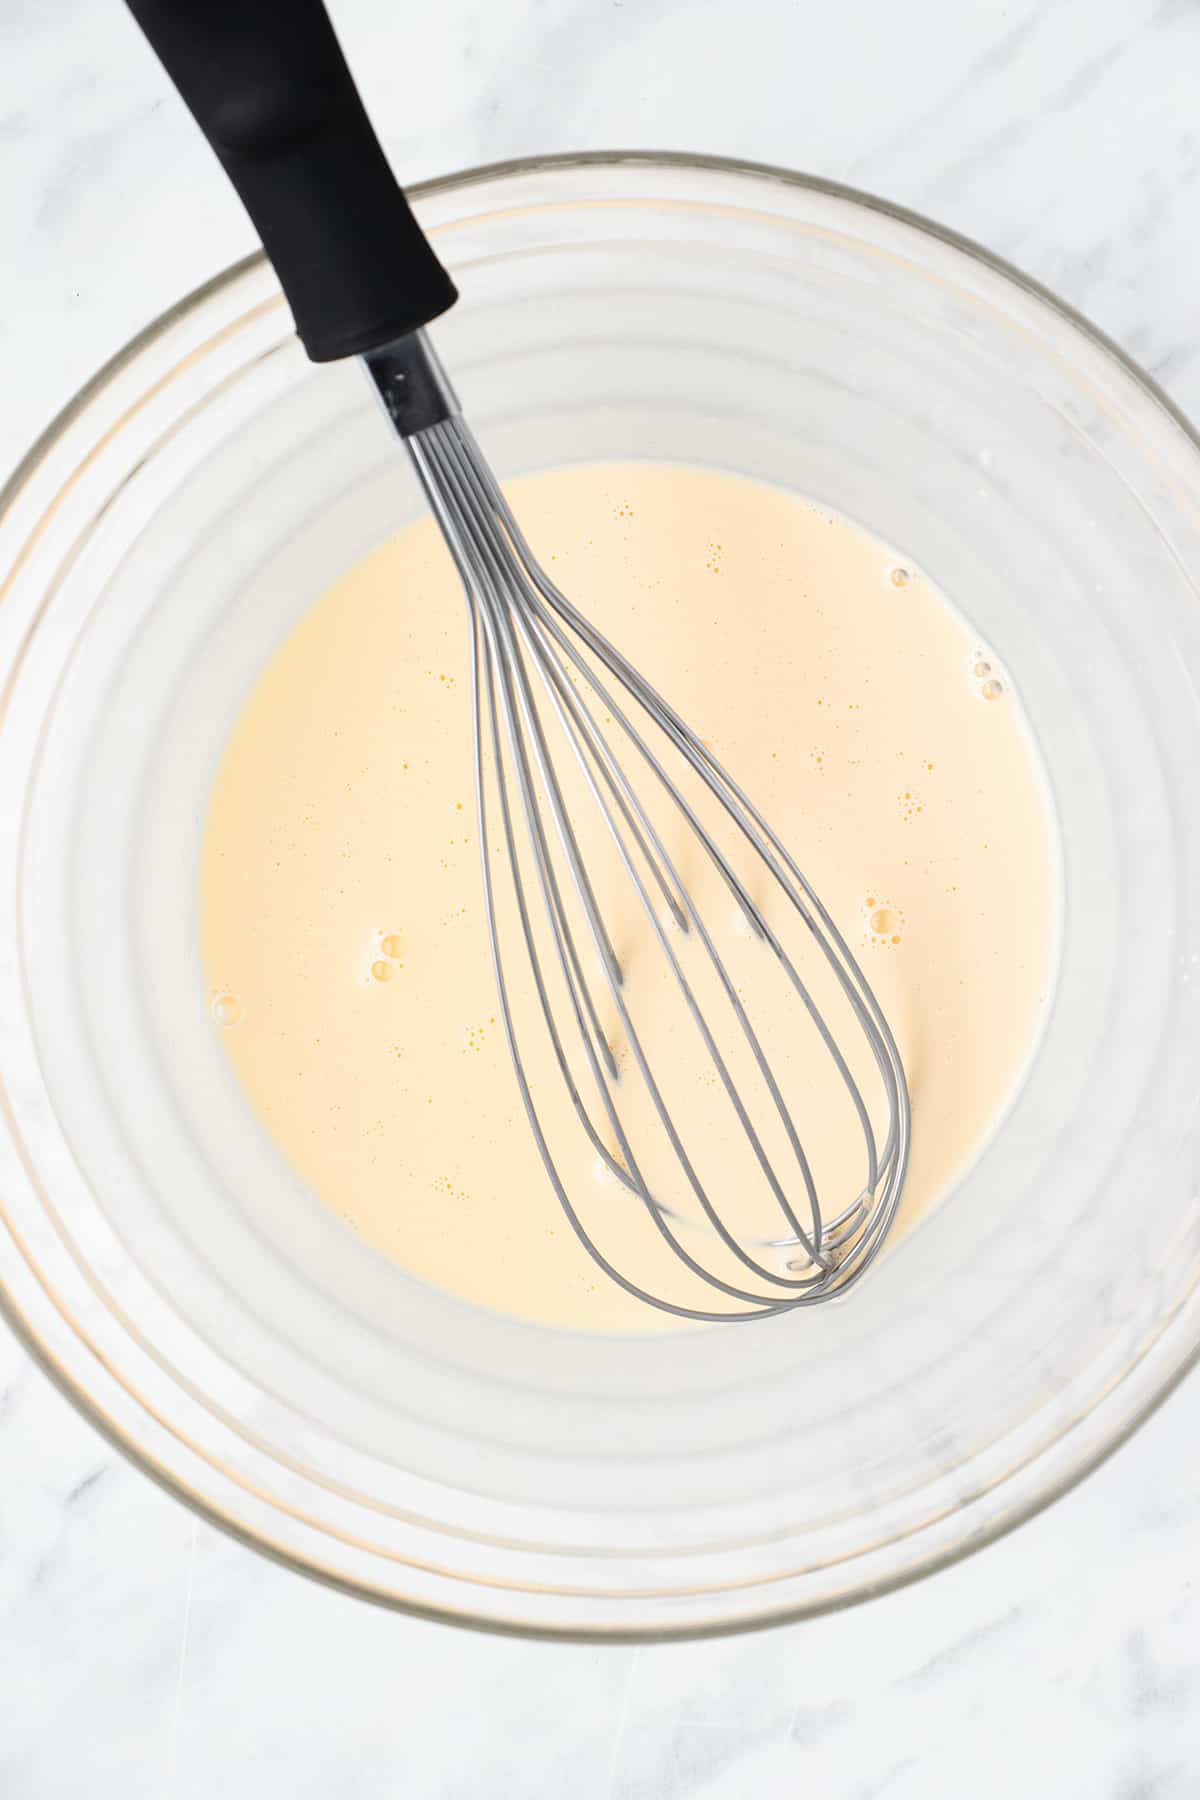 Cream, eggs, and vanilla whisked together in a bowl.